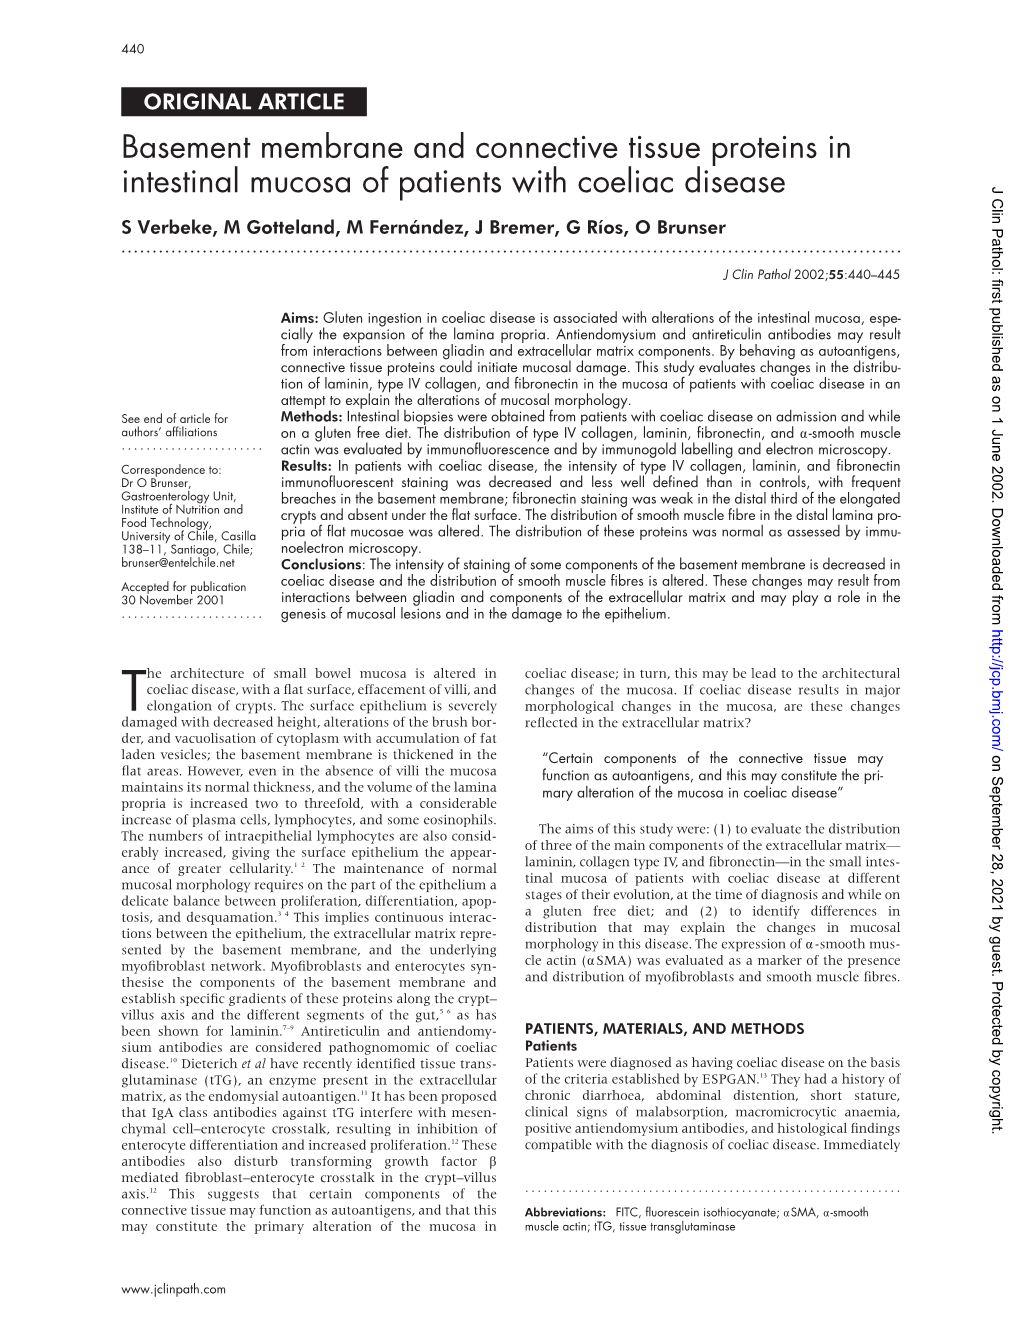 Basement Membrane and Connective Tissue Proteins in Intestinal Mucosa of Patients with Coeliac Disease J Clin Pathol: First Published As on 1 June 2002